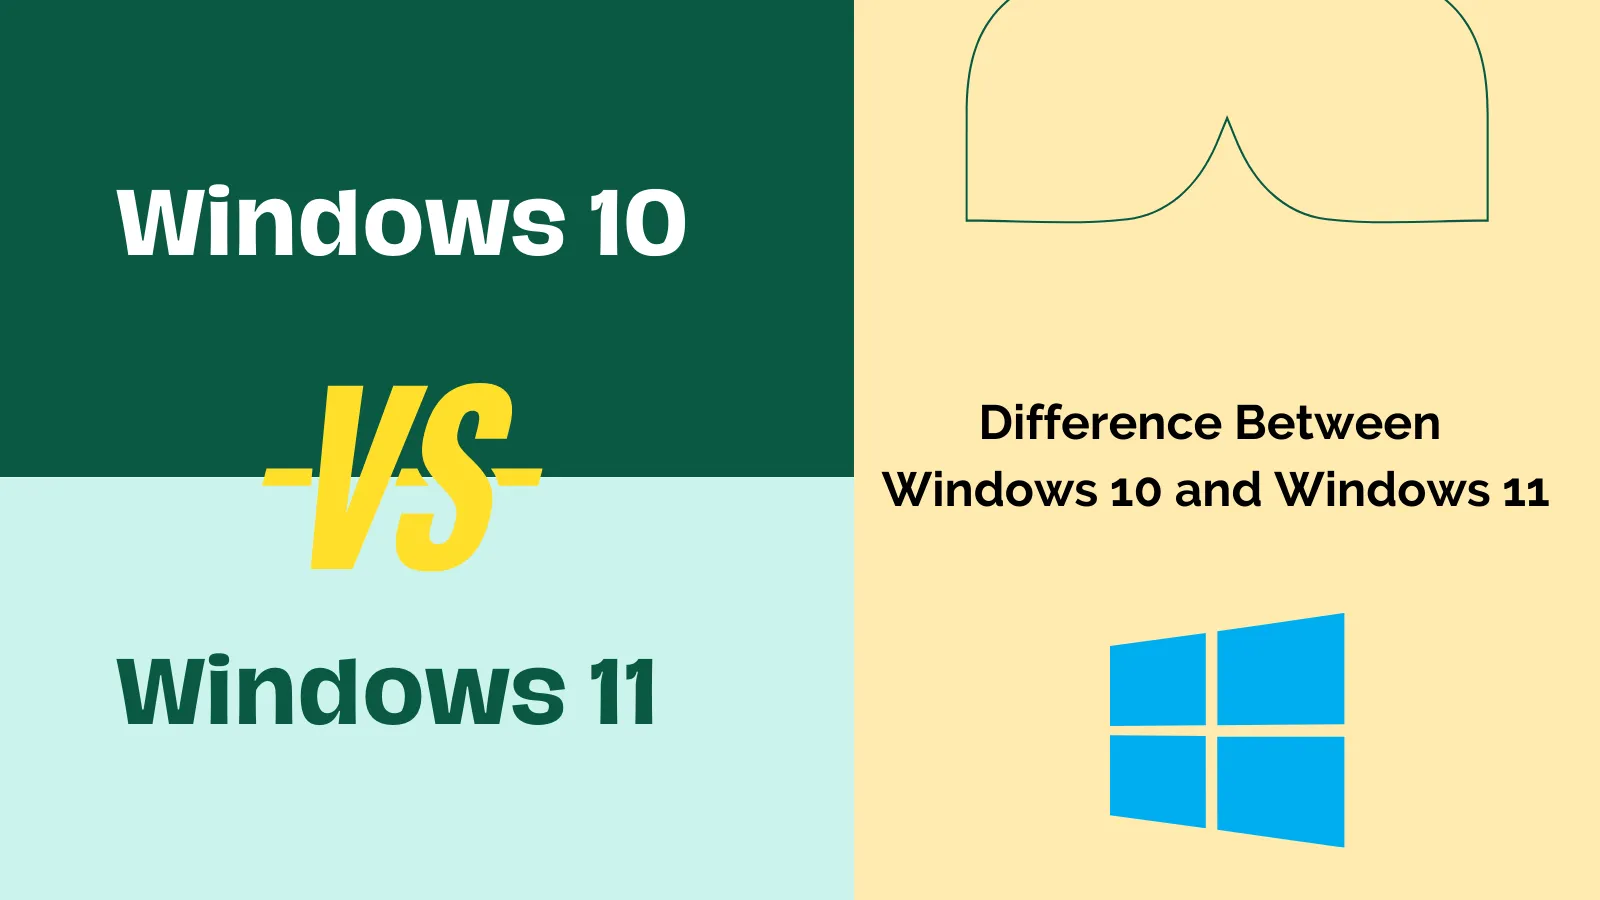 What Is the Difference Between Windows 10 and 11?